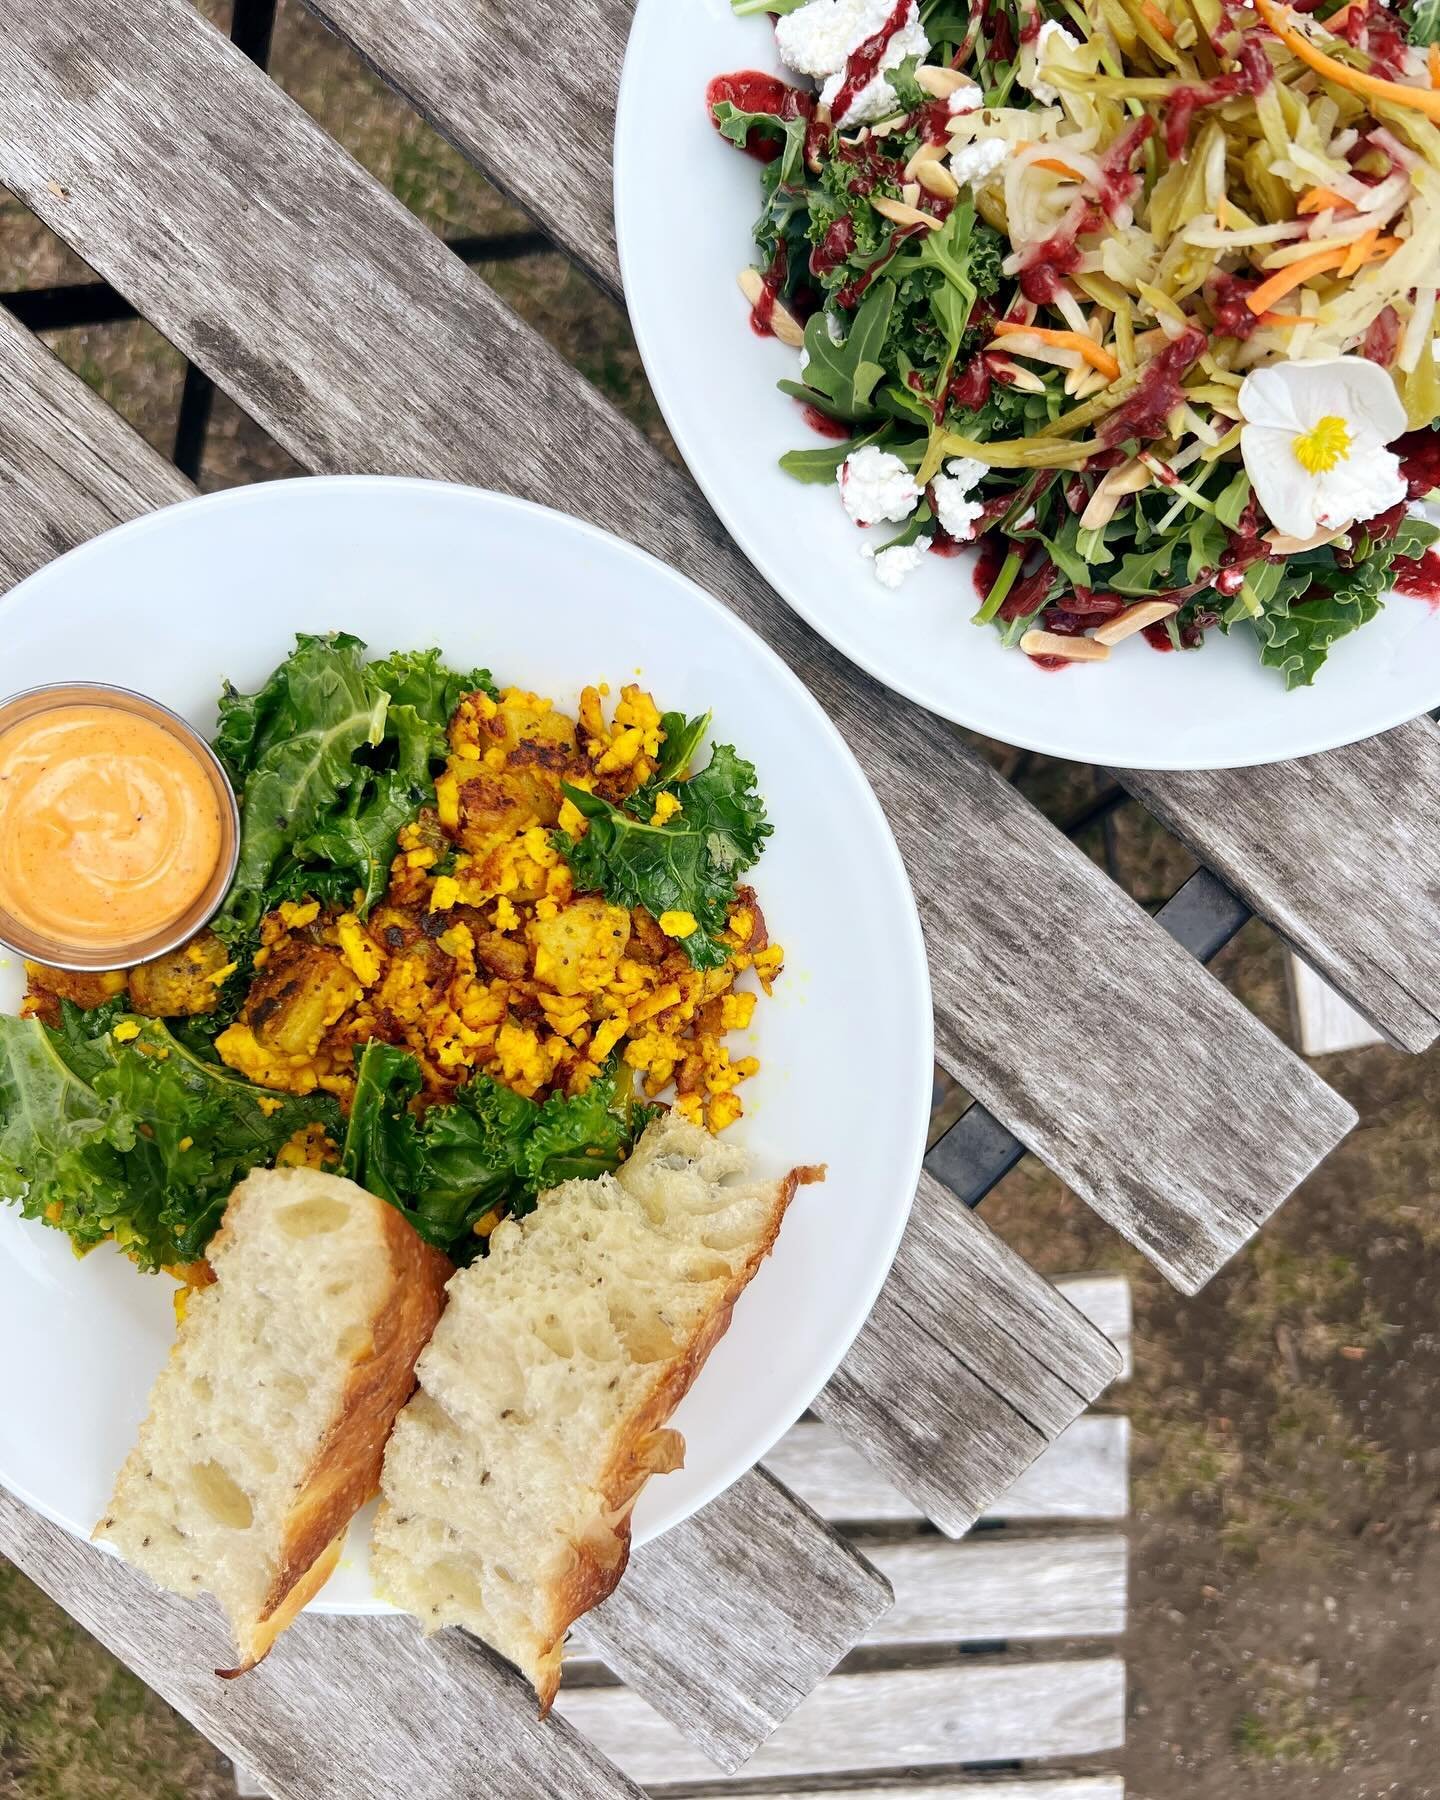 Sun is shining, birds are chirping, beautiful day to get outside &amp; brunch. ☀️ Try our new summer salad 🌱

#yegbrunch #patioseason #brunchtime #summersalad